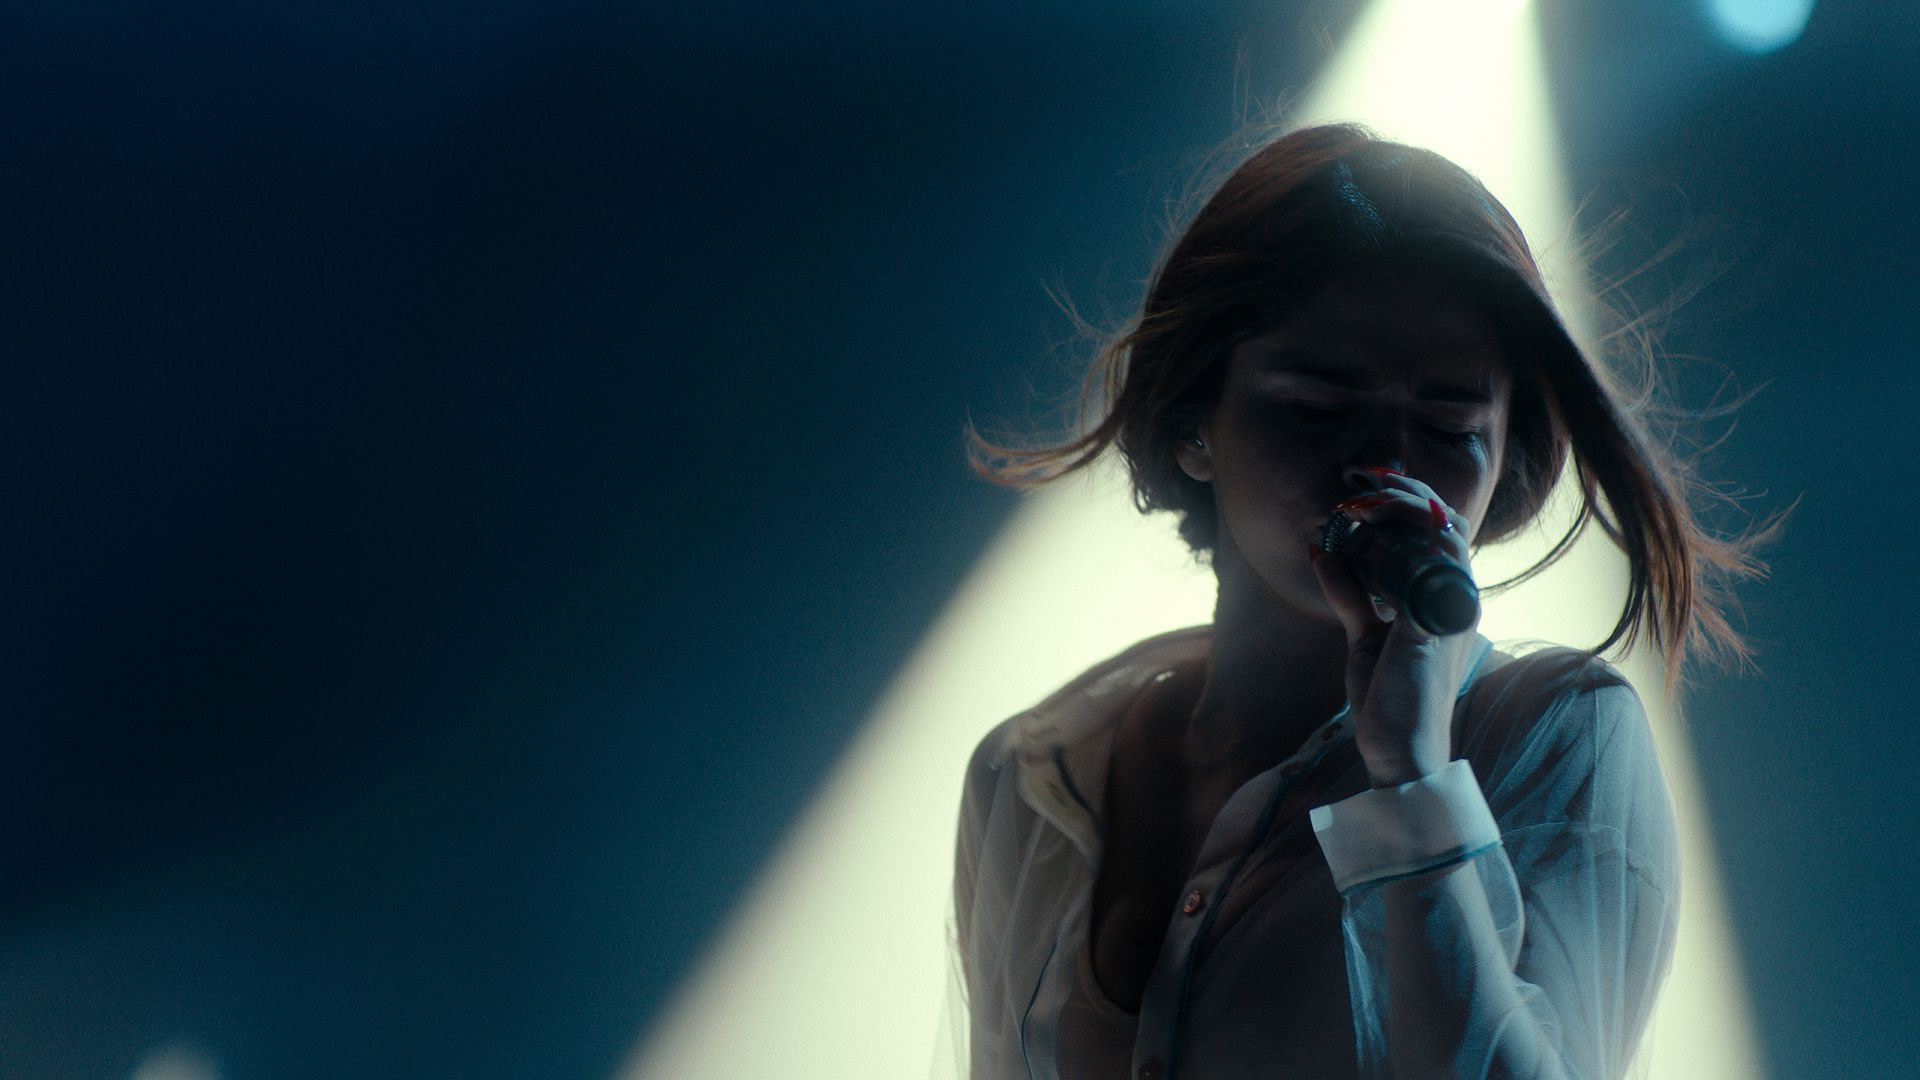 A woman (Selena Gomez) holding a microphone in one hand and singing while illuminated by a shaft of light in the background.